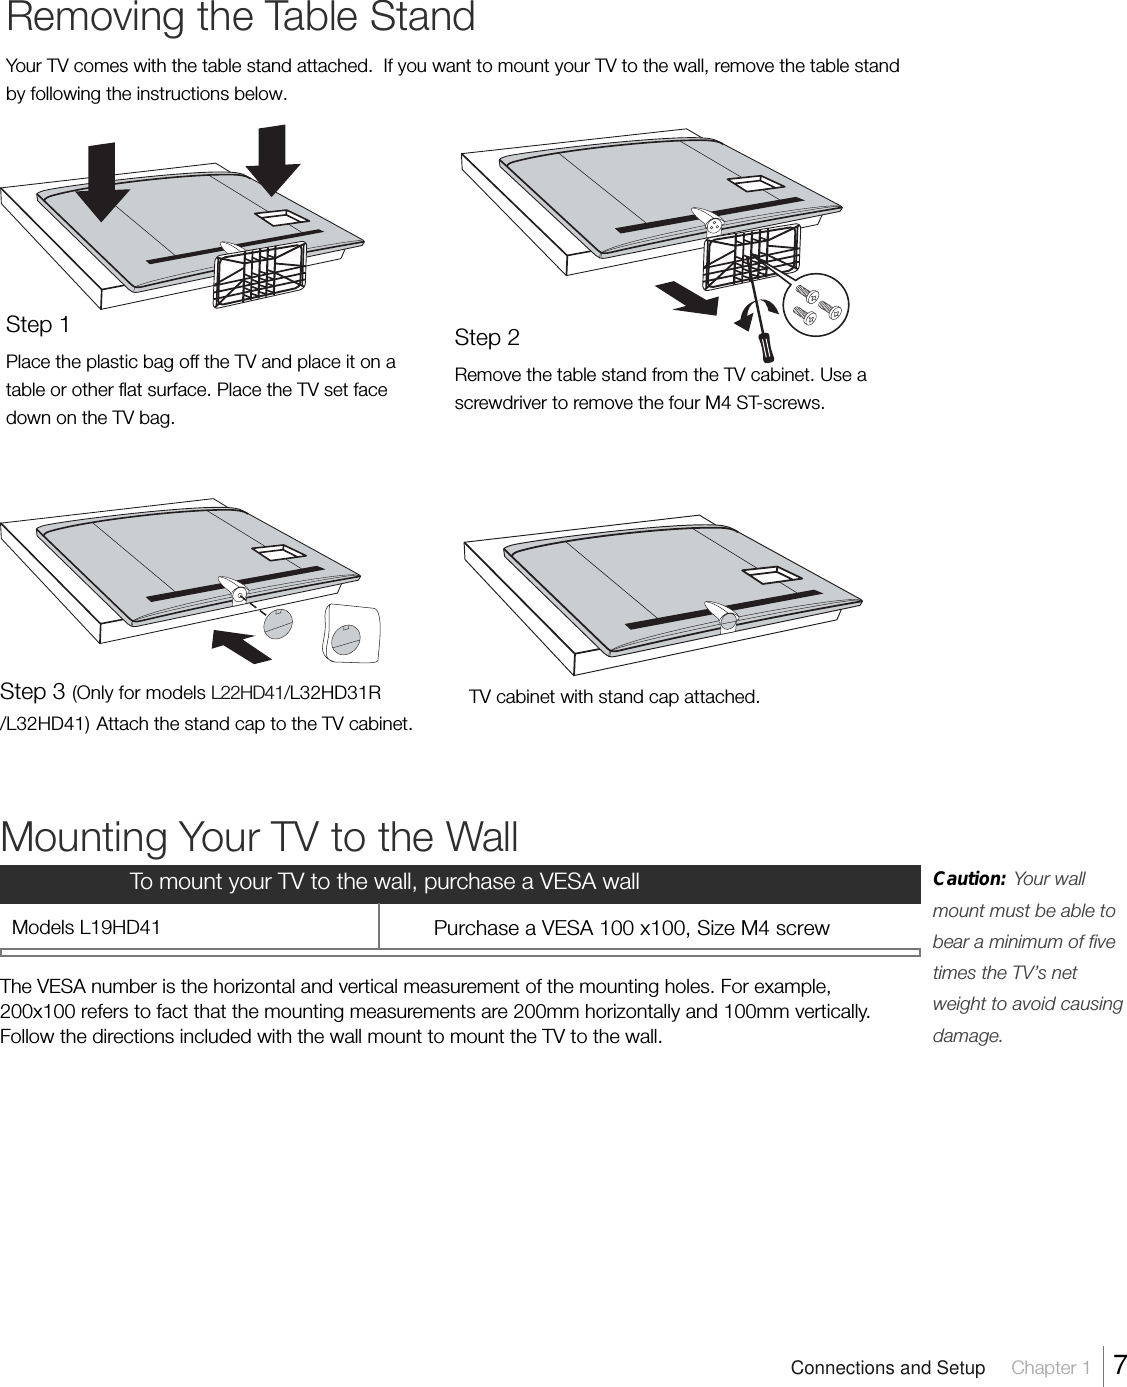 Removing the Table StandYour TV comes with the table stand attached.  If you want to mount your TV to the wall, remove the table standby following the instructions below.Step 1Place the plastic bag off the TV and place it on atable or other flat surface. Place the TV set facedown on the TV bag.Step 3 (Only for models L22HD41/L32HD31R/L32HD41) Attach the stand cap to the TV cabinet.TV cabinet with stand cap attached.Connections and Setup     Chapter 1    7Step 2Remove the table stand from the TV cabinet. Use ascrewdriver to remove the four M4 ST-screws.Mounting Your TV to the WallThe VESA number is the horizontal and vertical measurement of the mounting holes. For example,200x100 refers to fact that the mounting measurements are 200mm horizontally and 100mm vertically.Follow the directions included with the wall mount to mount the TV to the wall.Caution:     Your wallmount must be able tobear a minimum of fivetimes the TV’s netweight to avoid causingdamage.To mount your TV to the wall, purchase a VESA wallModels L19HD41 Purchase a VESA 100 x100, Size M4 screw